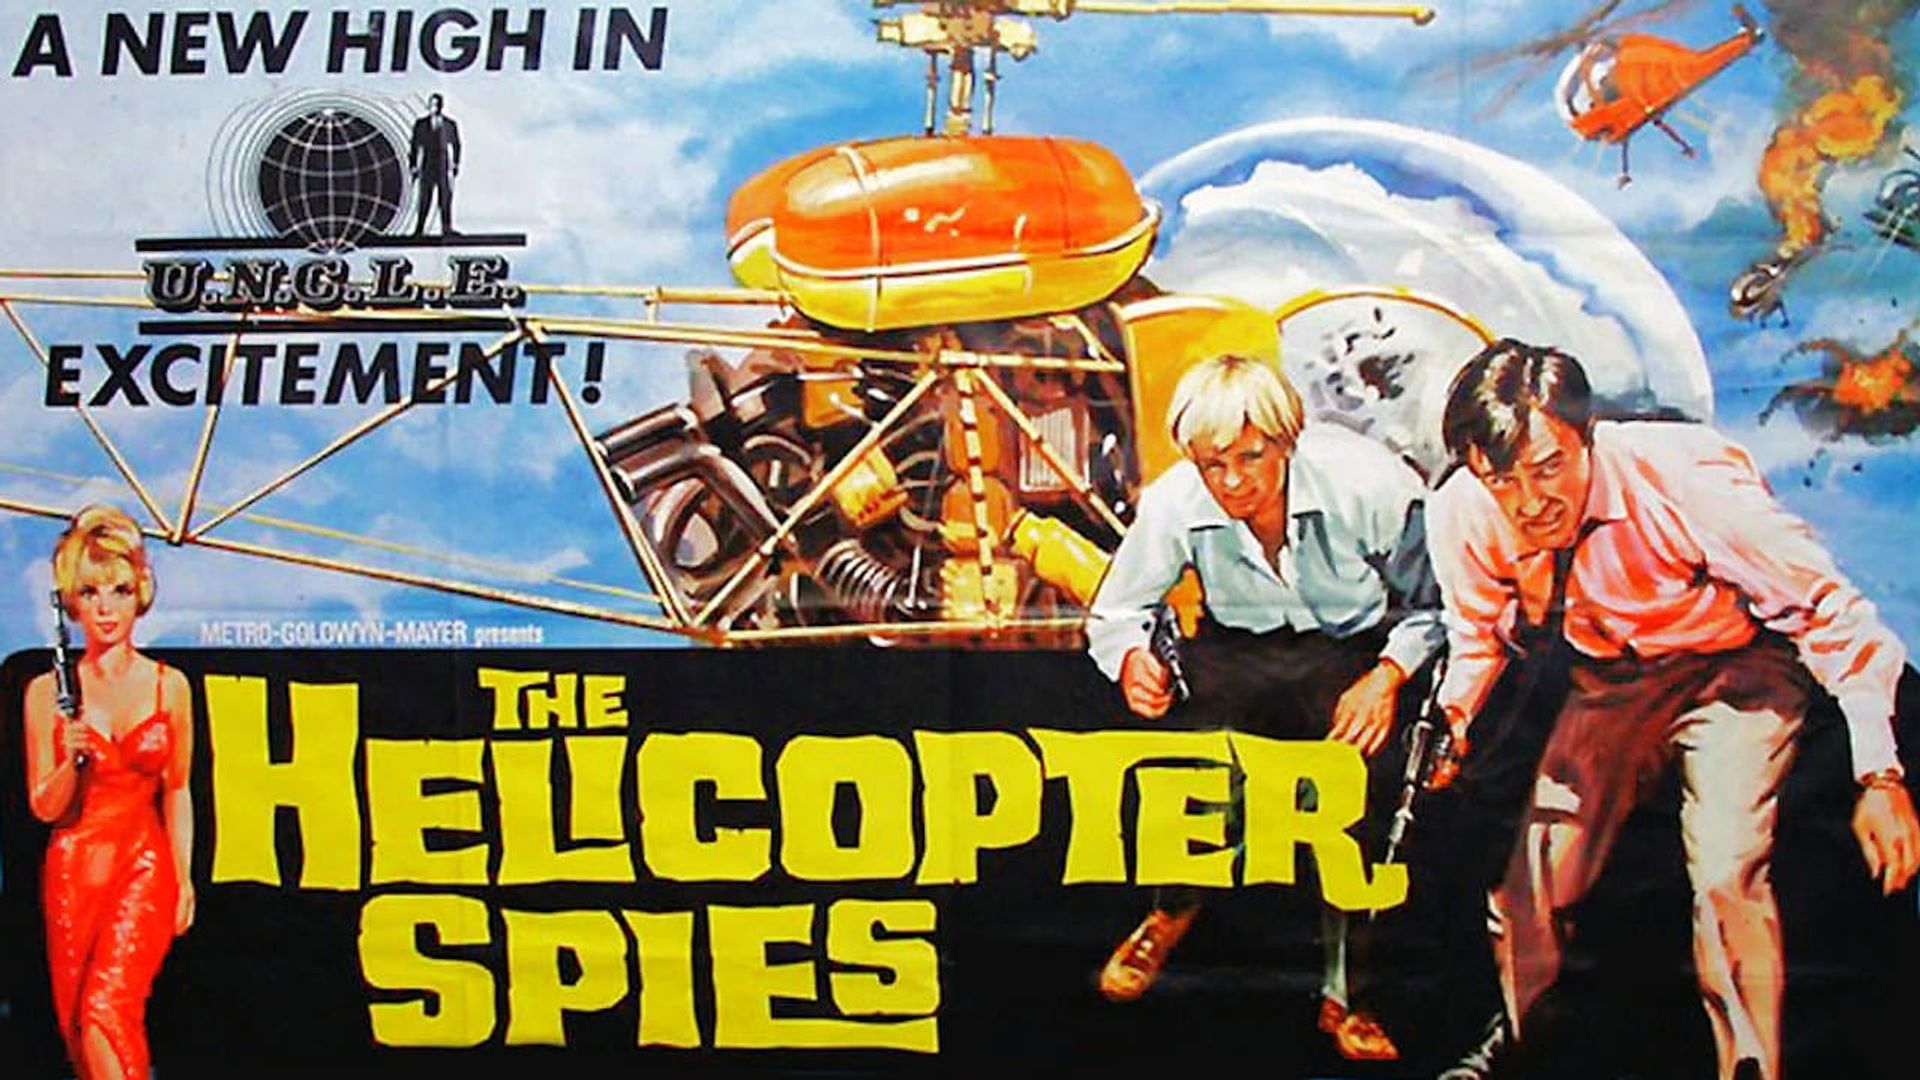 The Helicopter Spies Backdrop